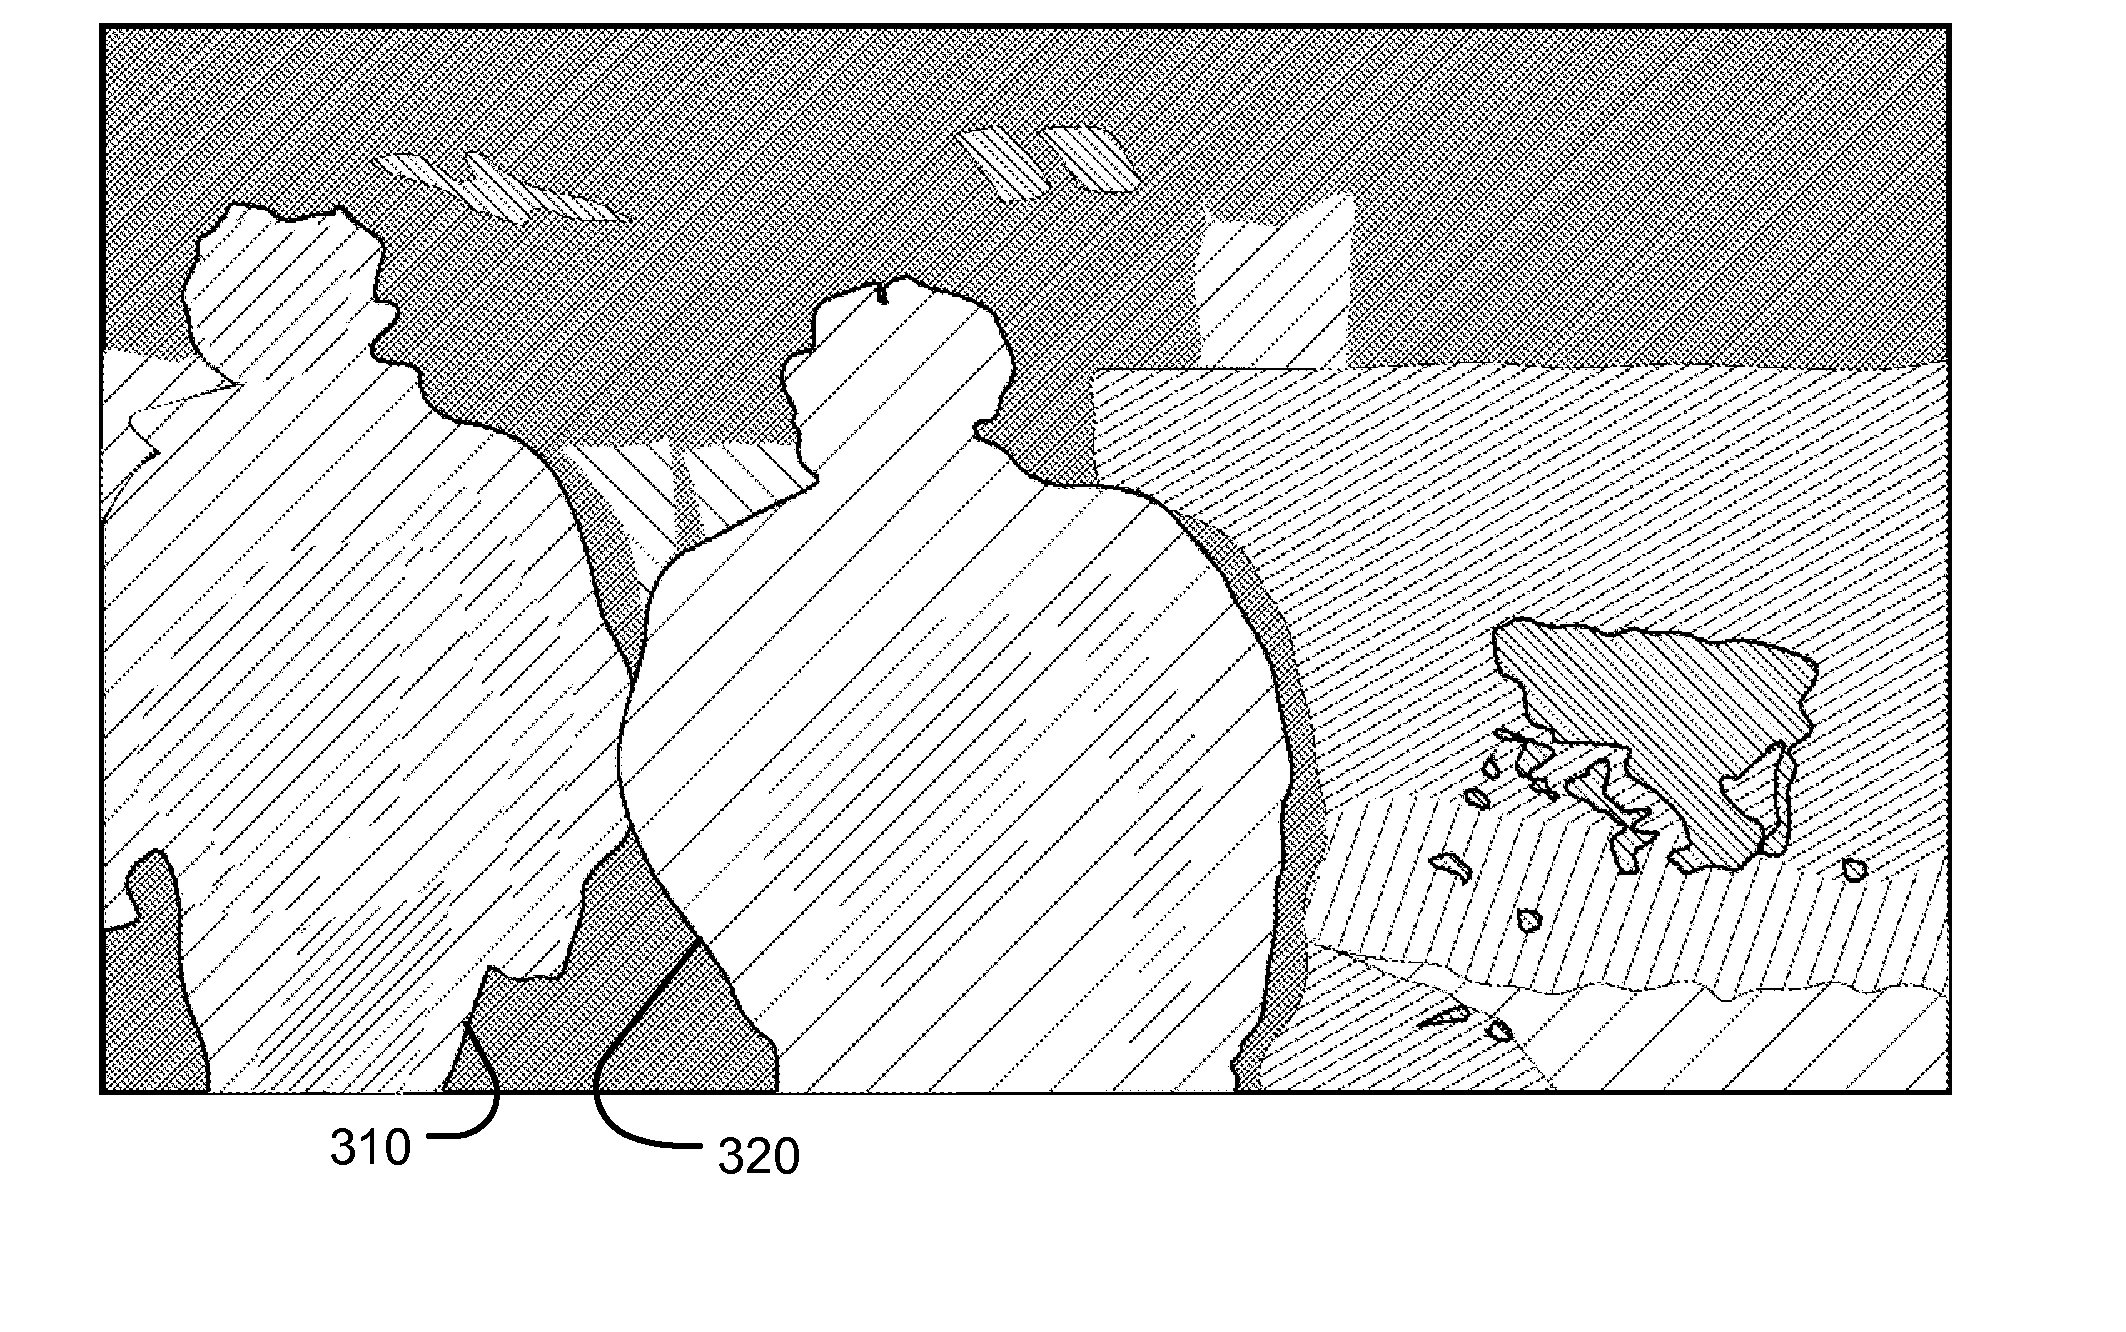 Method and Apparatus for Foreground Object Detection